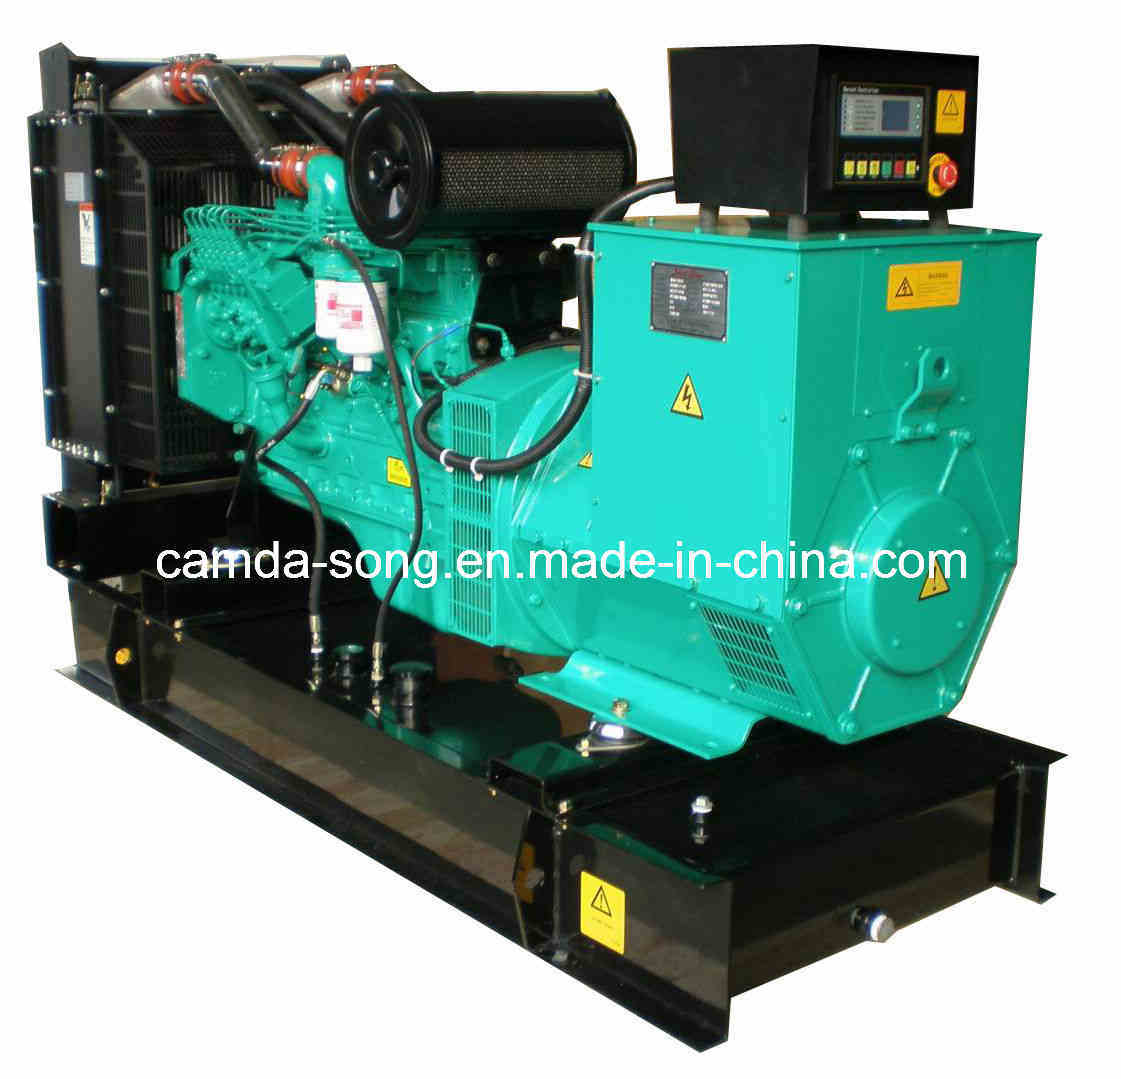 Cummins Diesel Generator (50Hz) with CE and ISO Certificates (KDGC)